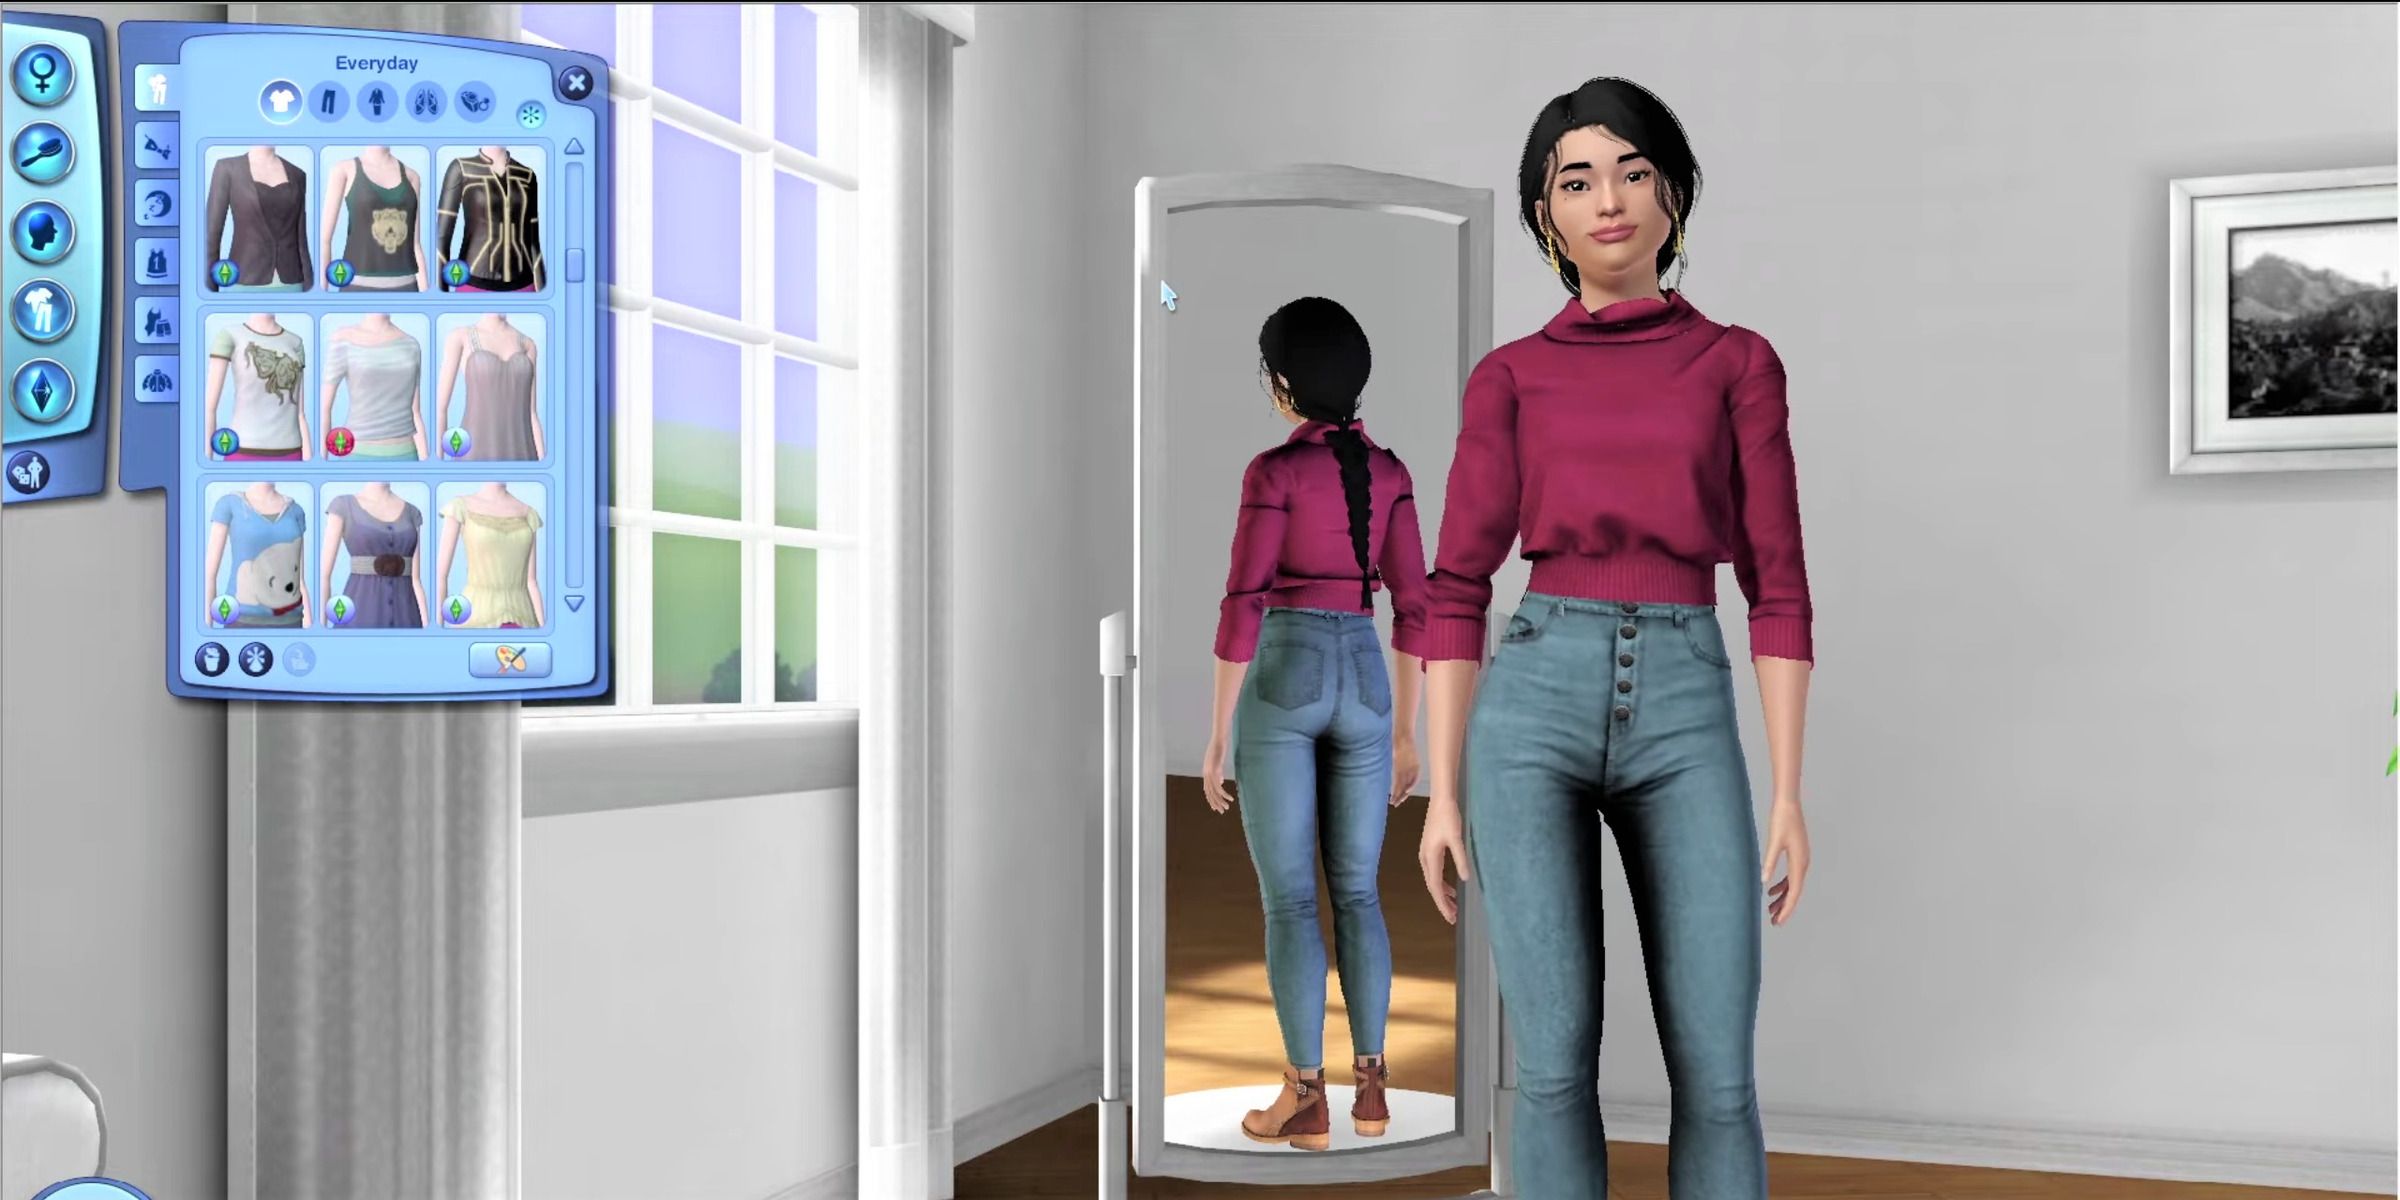 Pauline Wan stands in CAS, with default hair, makeup, and clothing replacements.